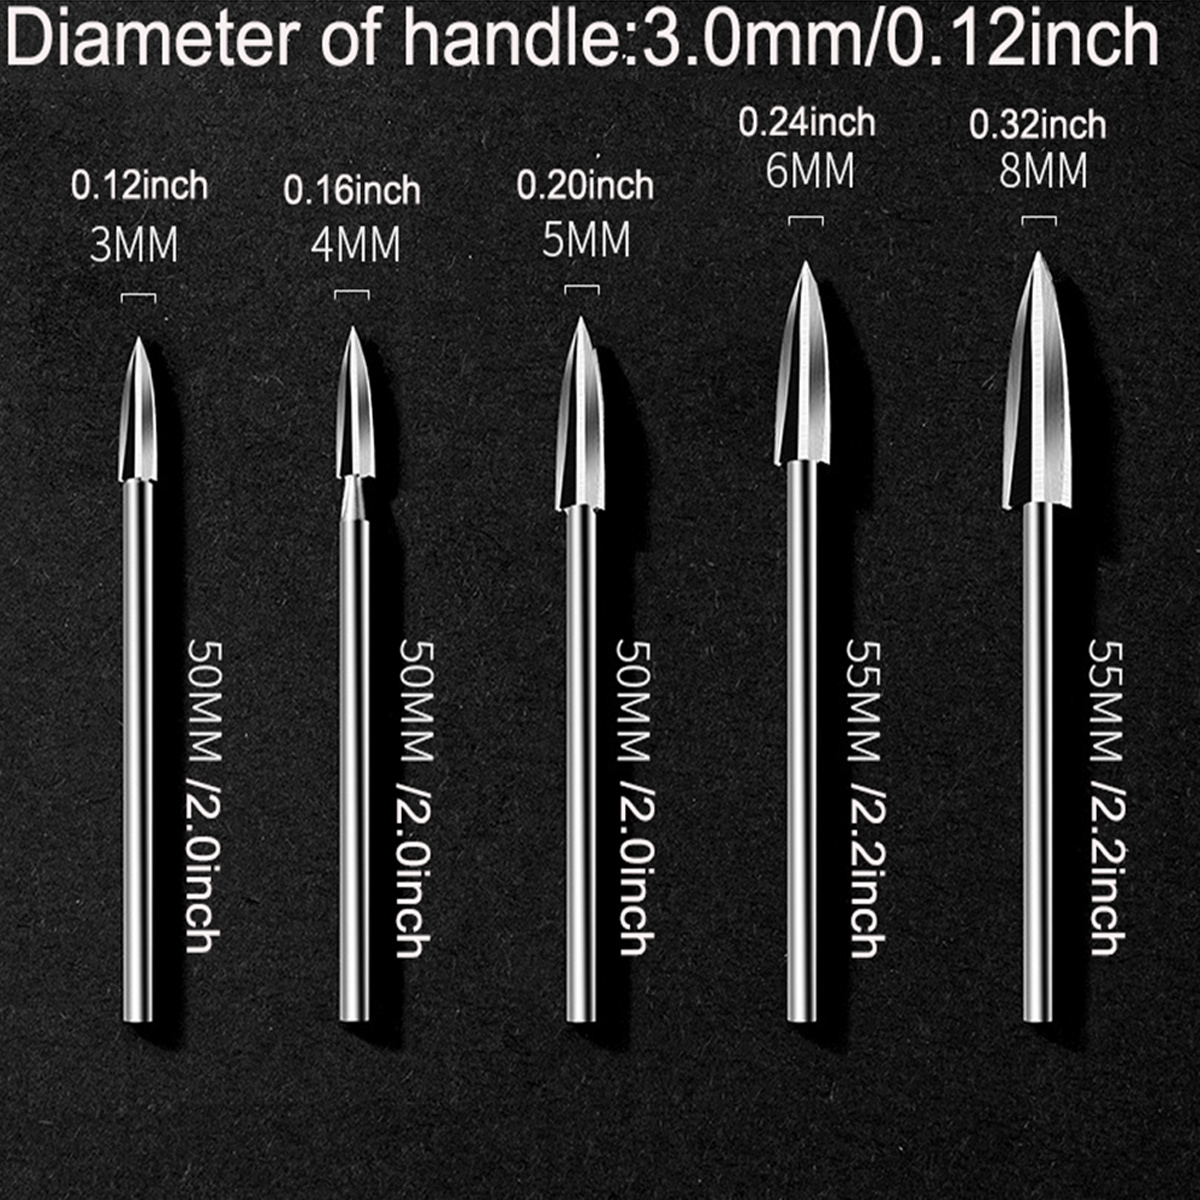 Wood Carving Tools, 5 PCS HSS Engraving Drill Bit Set Wood Crafts Grinding Woodworking  Tool 1/8” Shank Universal Fitment for Rotary Tools